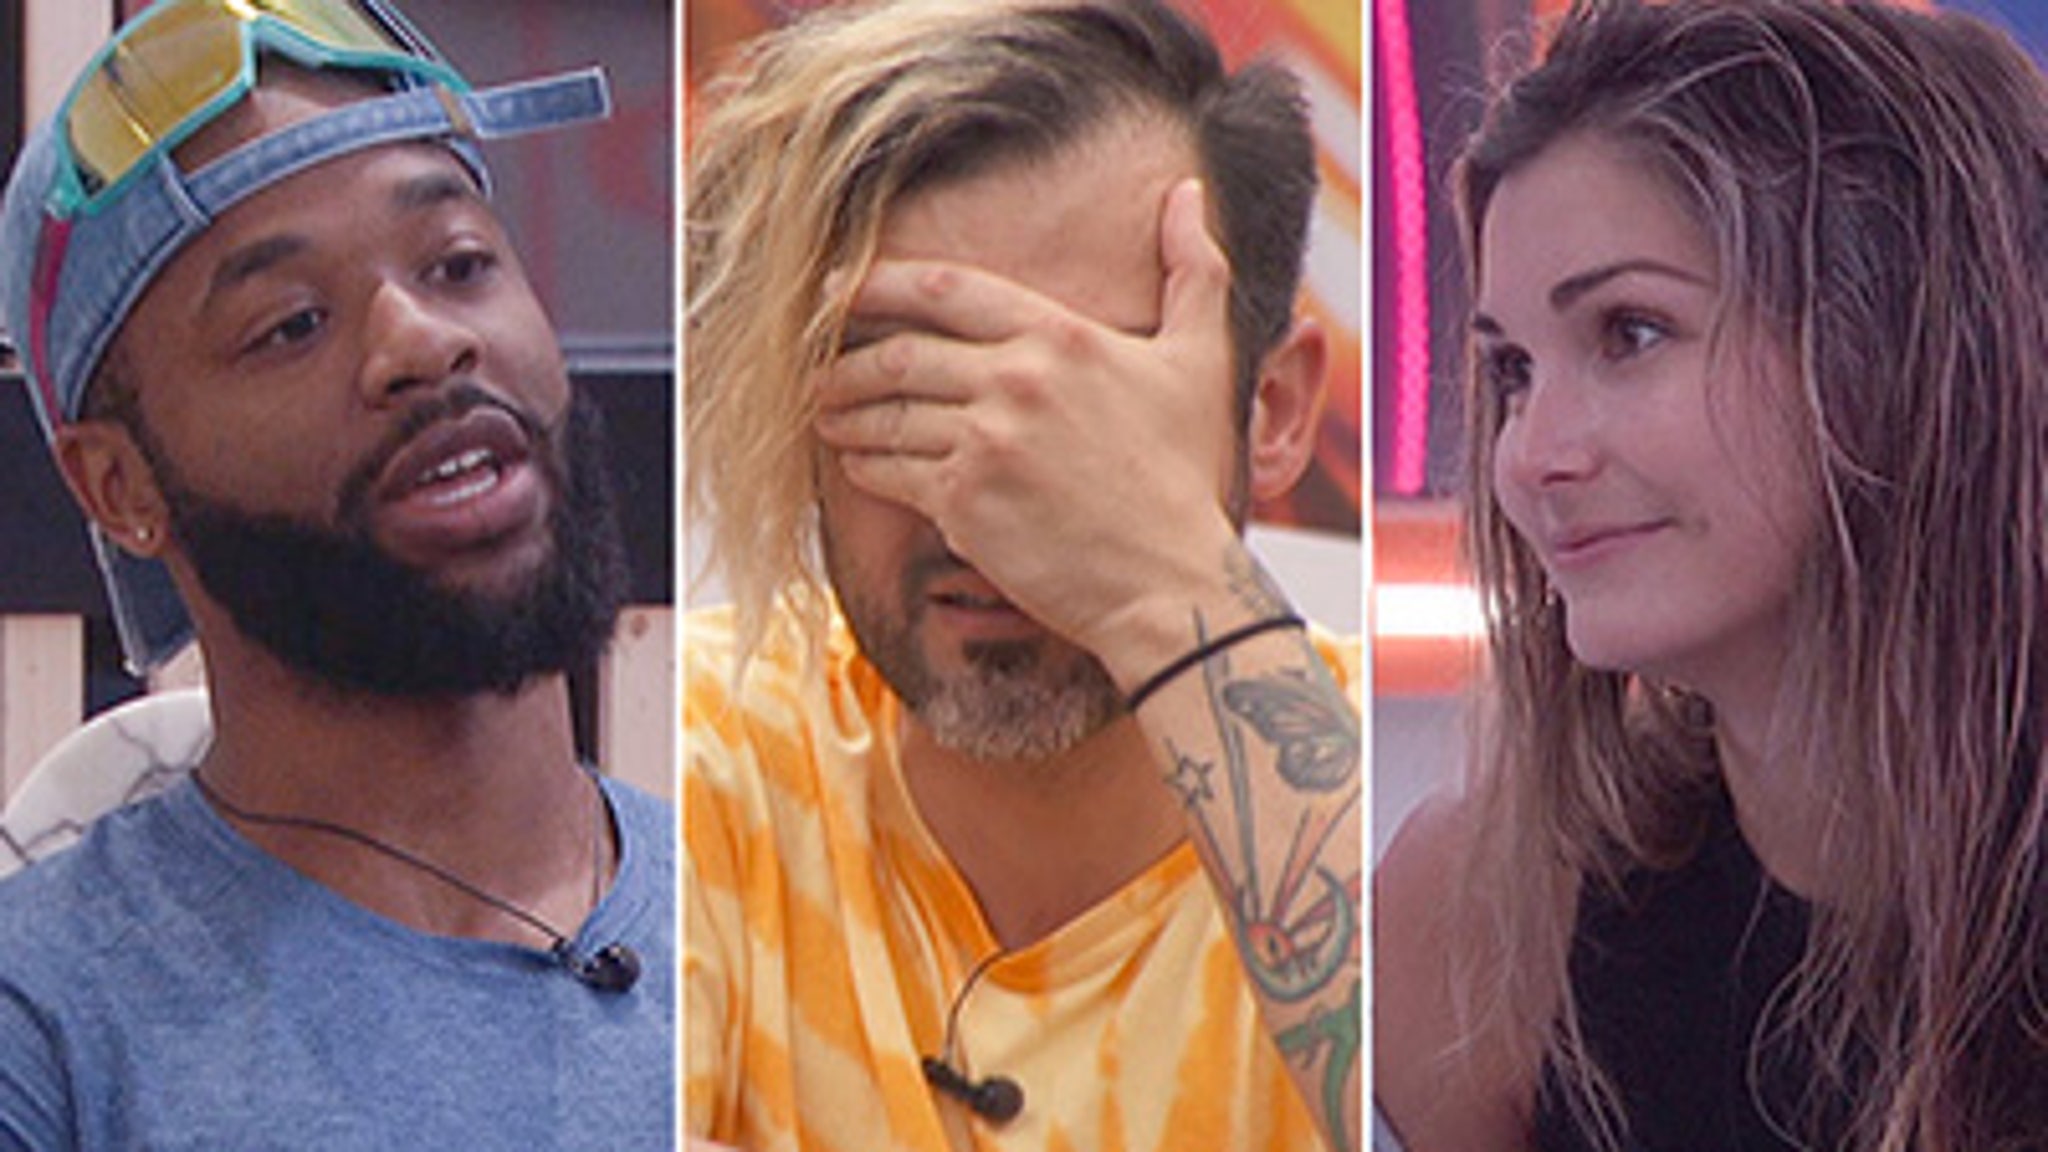 Big Brother Blowout: Veto Leads to 'One of the Dumbest Moves in Big Brother History'